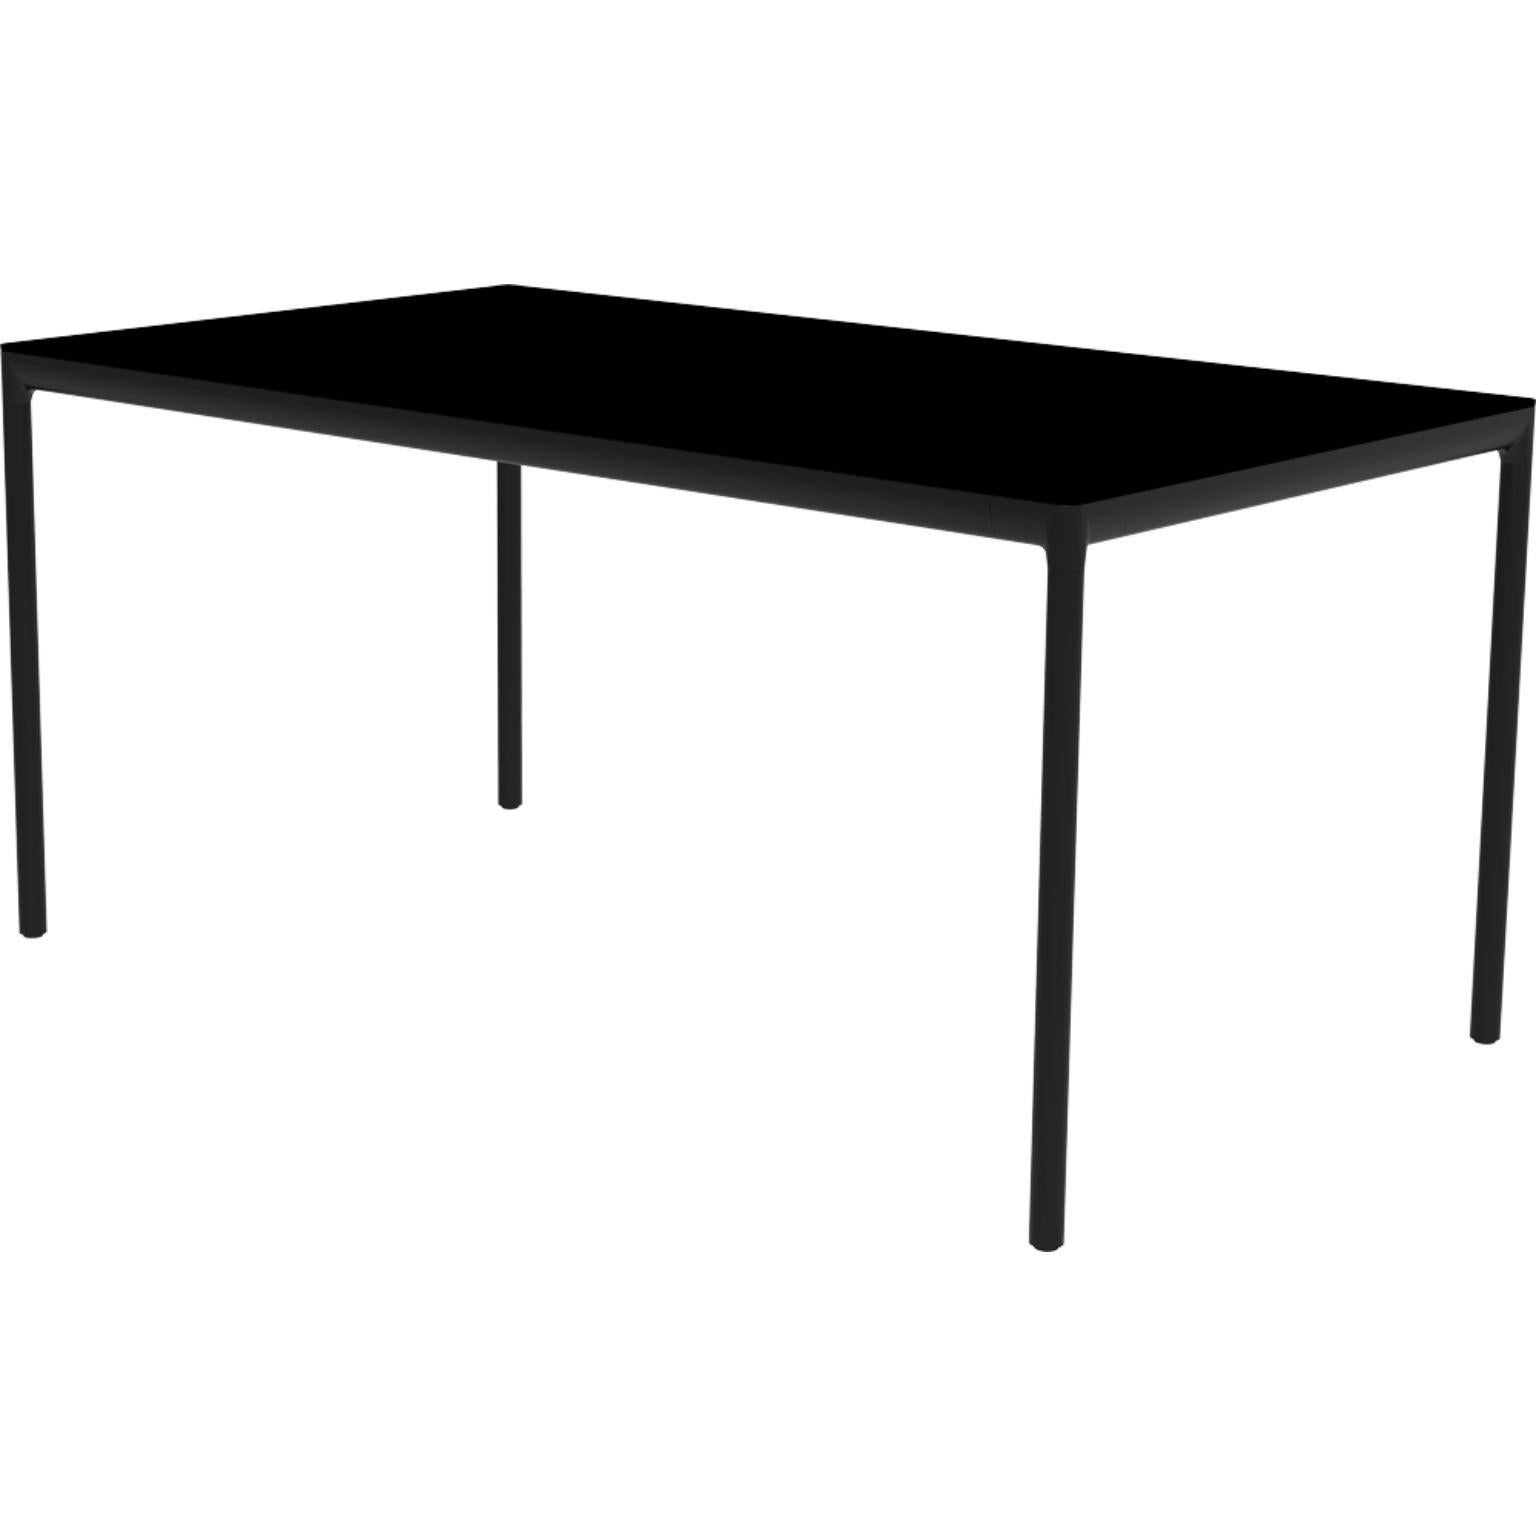 Ribbons Black 160 Coffee Table by MOWEE.
Dimensions: D90 x W160 x H75 cm.
Material: Aluminum and HPL top.
Weight: 21 kg.
Also available in different colors and finishes. (HPL Black Edge or Neolith top).

An unmistakable collection for its beauty and